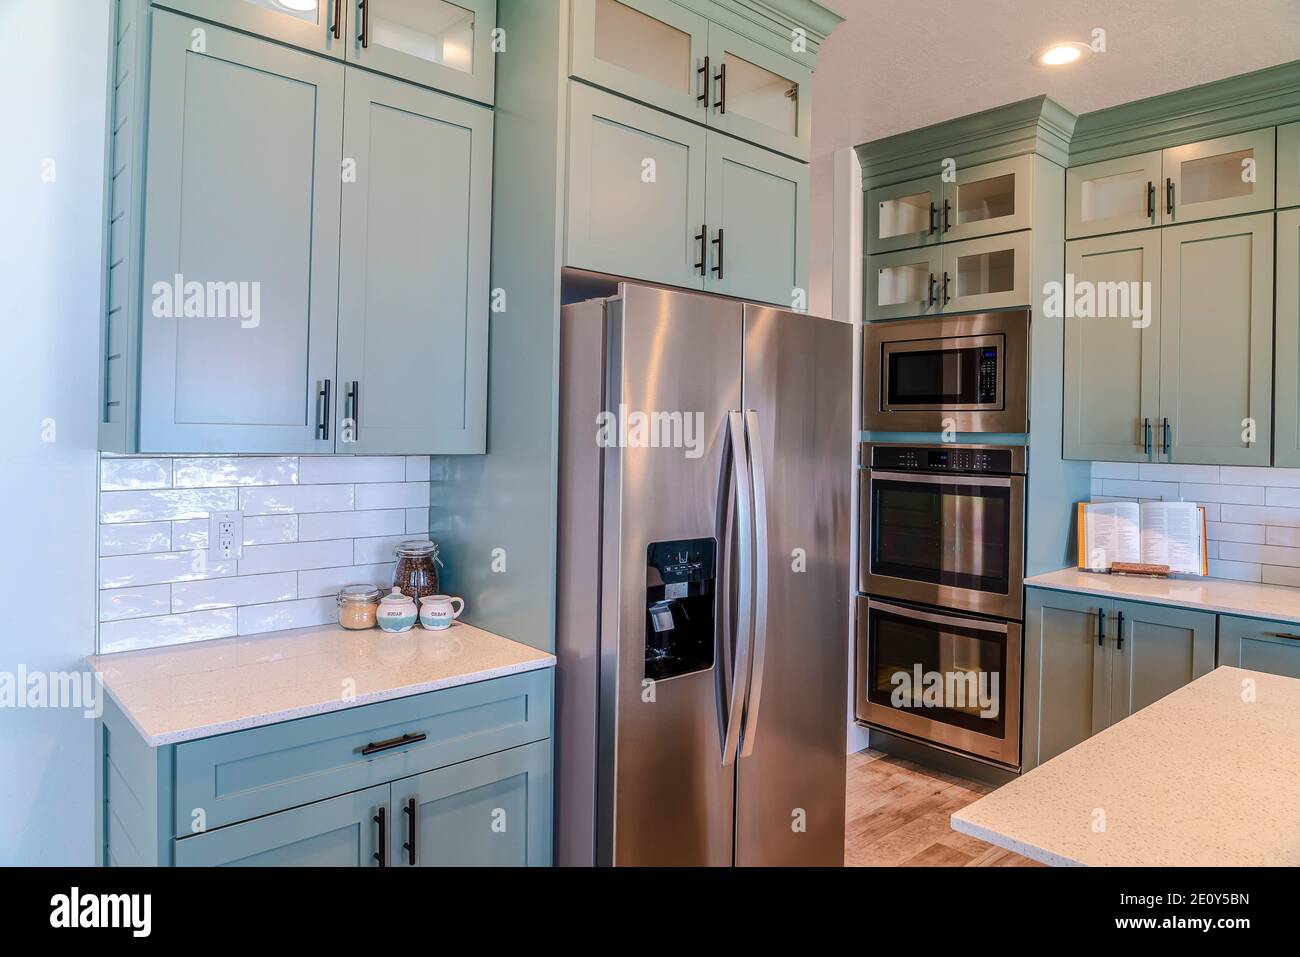 https://c8.alamy.com/comp/2E0Y5BN/modern-electric-cooking-appliances-and-built-in-cabinets-inside-kitchen-of-home-2E0Y5BN.jpg